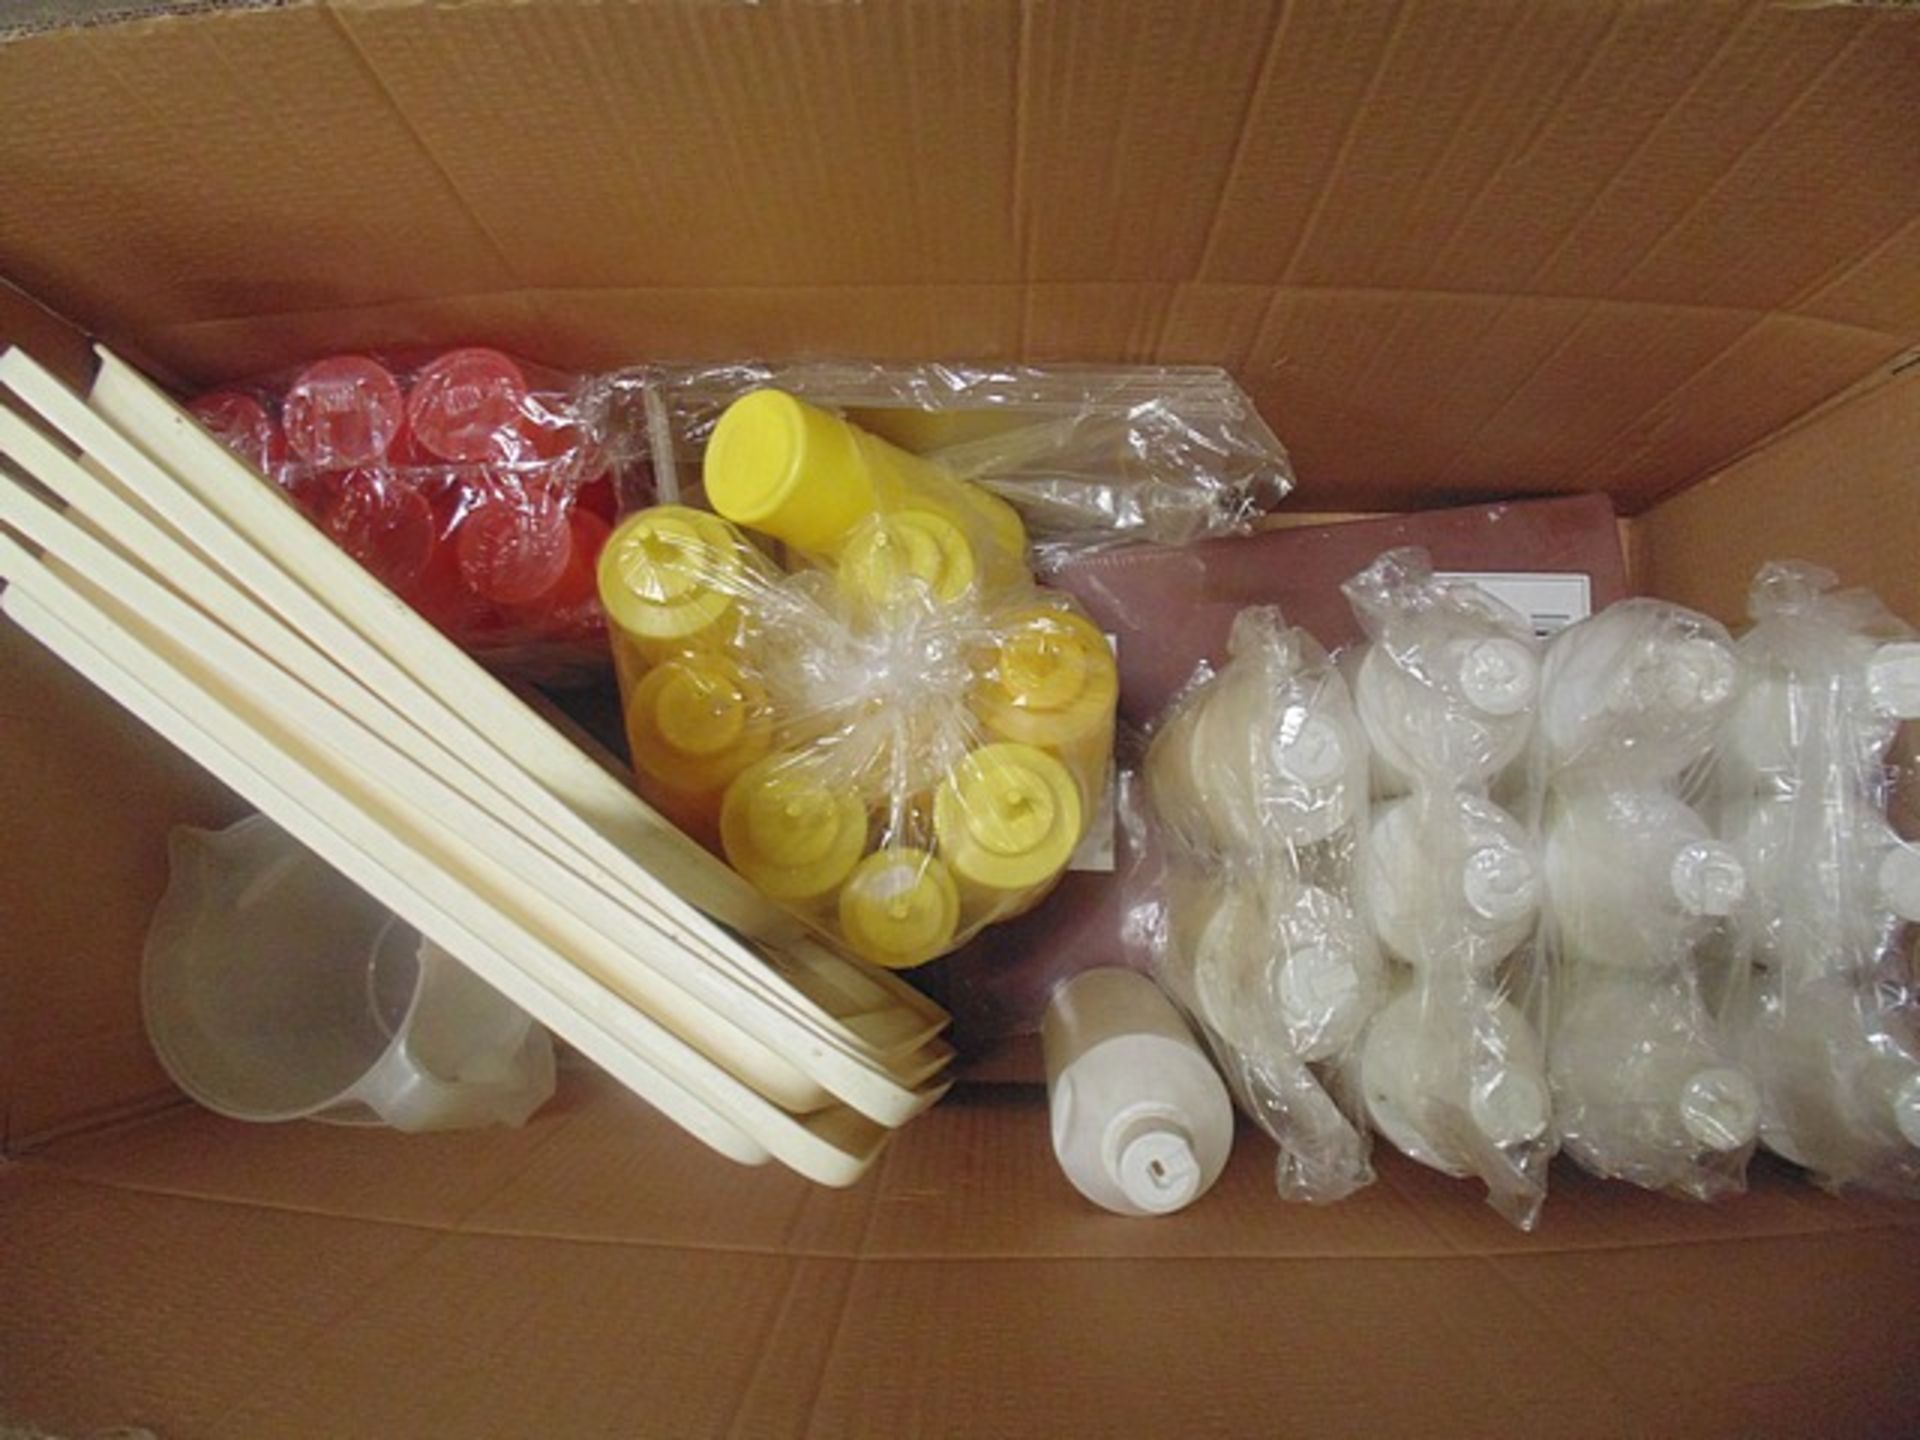 Job lot comprising brand new of 4 x 24oz squeeze bottles red, 8 x 24oz squeeze bottles yellow, 2 x - Image 2 of 2